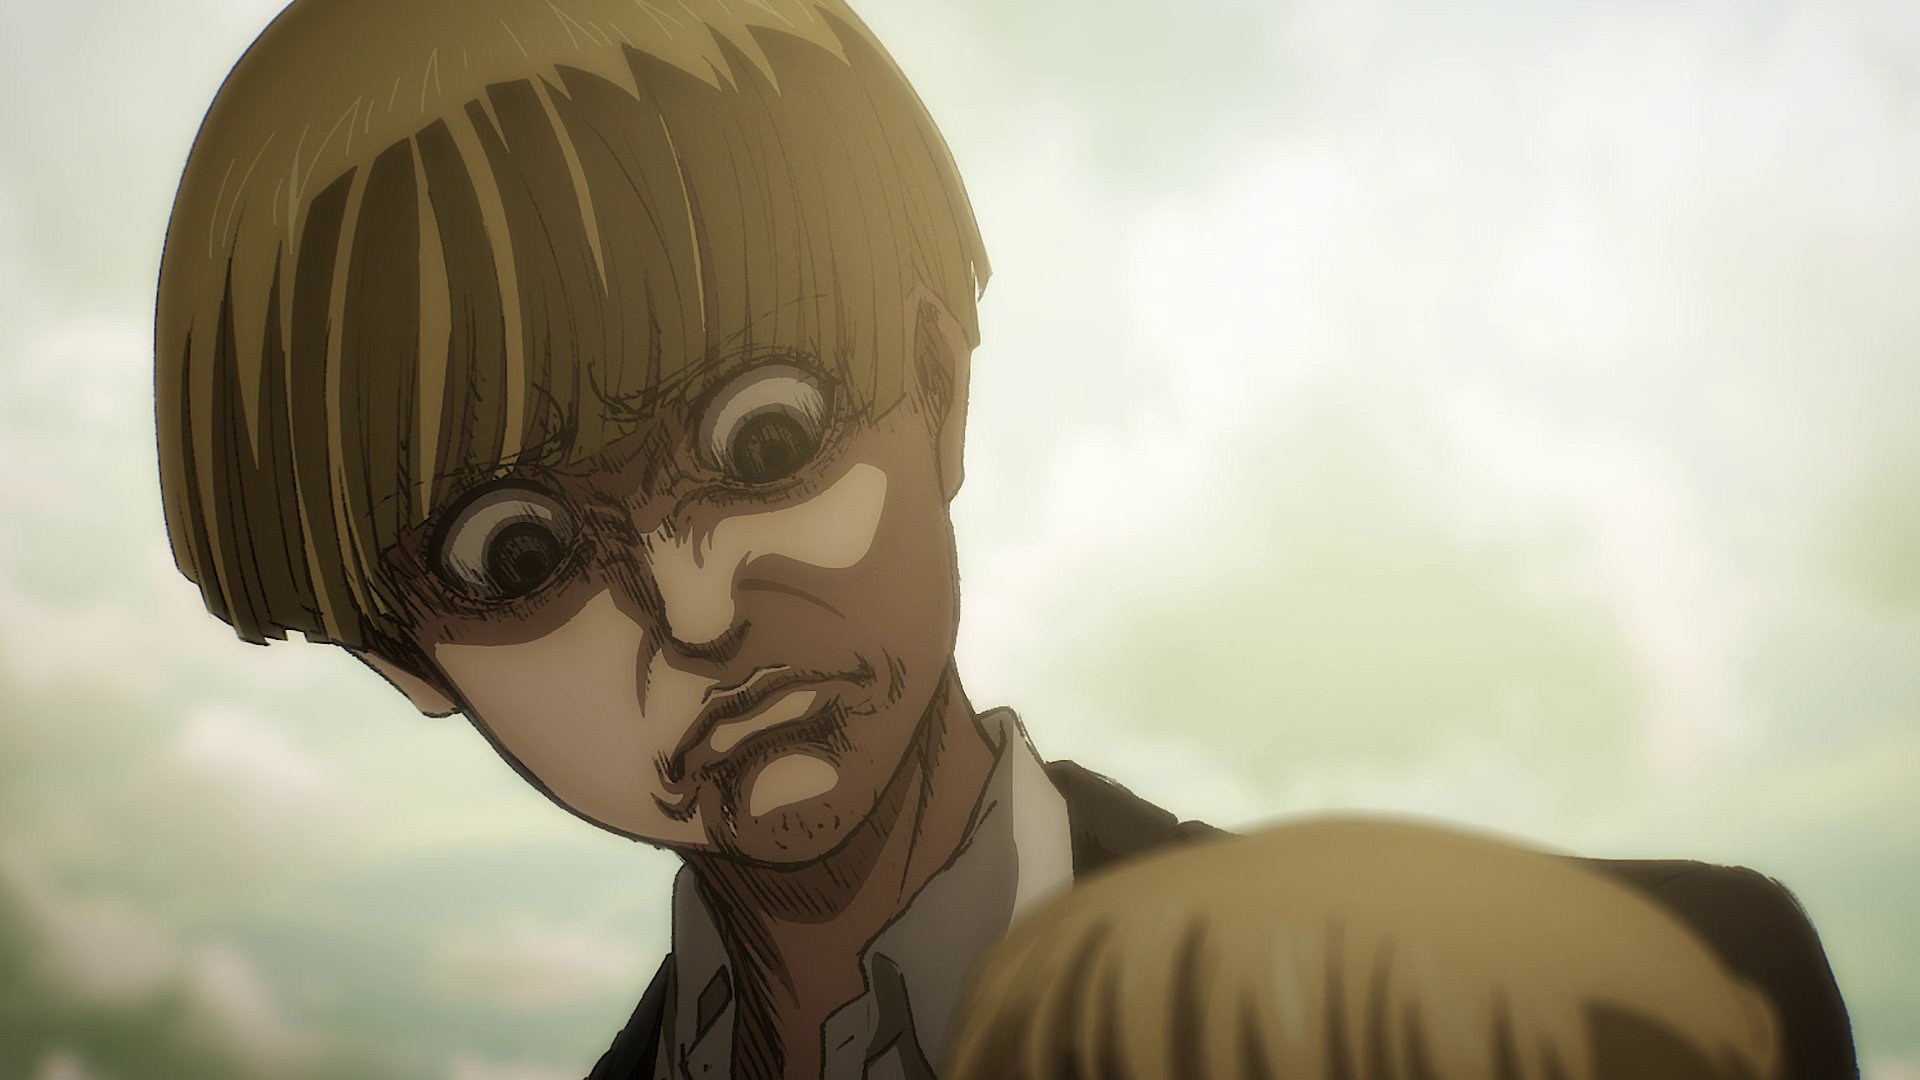 Where to watch Attack on Titan right now